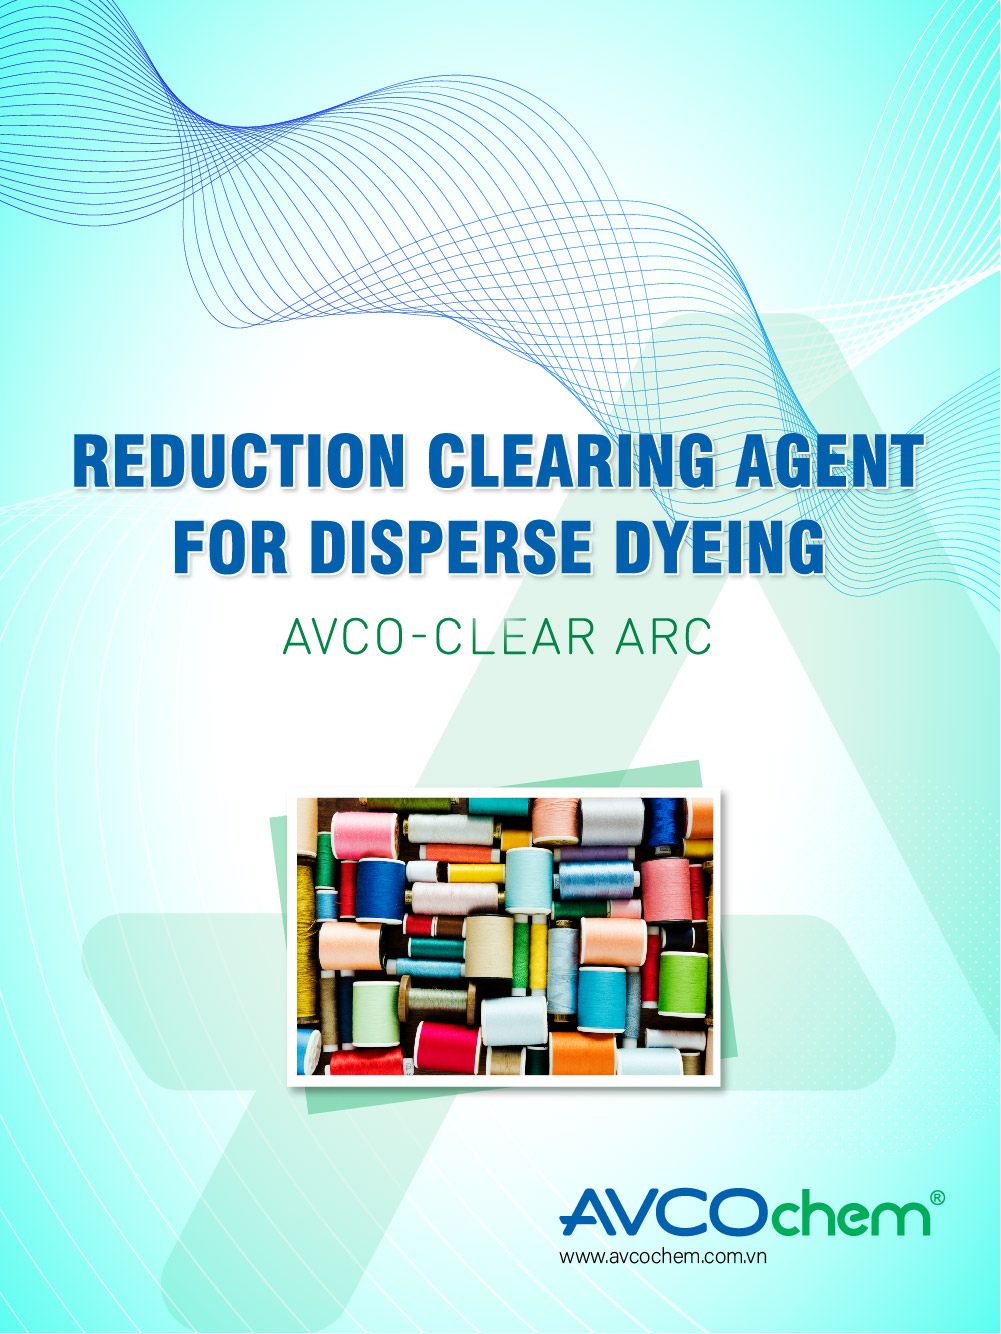 REDUCTION CLEARING AGENT FOR DISPERSE DYEING